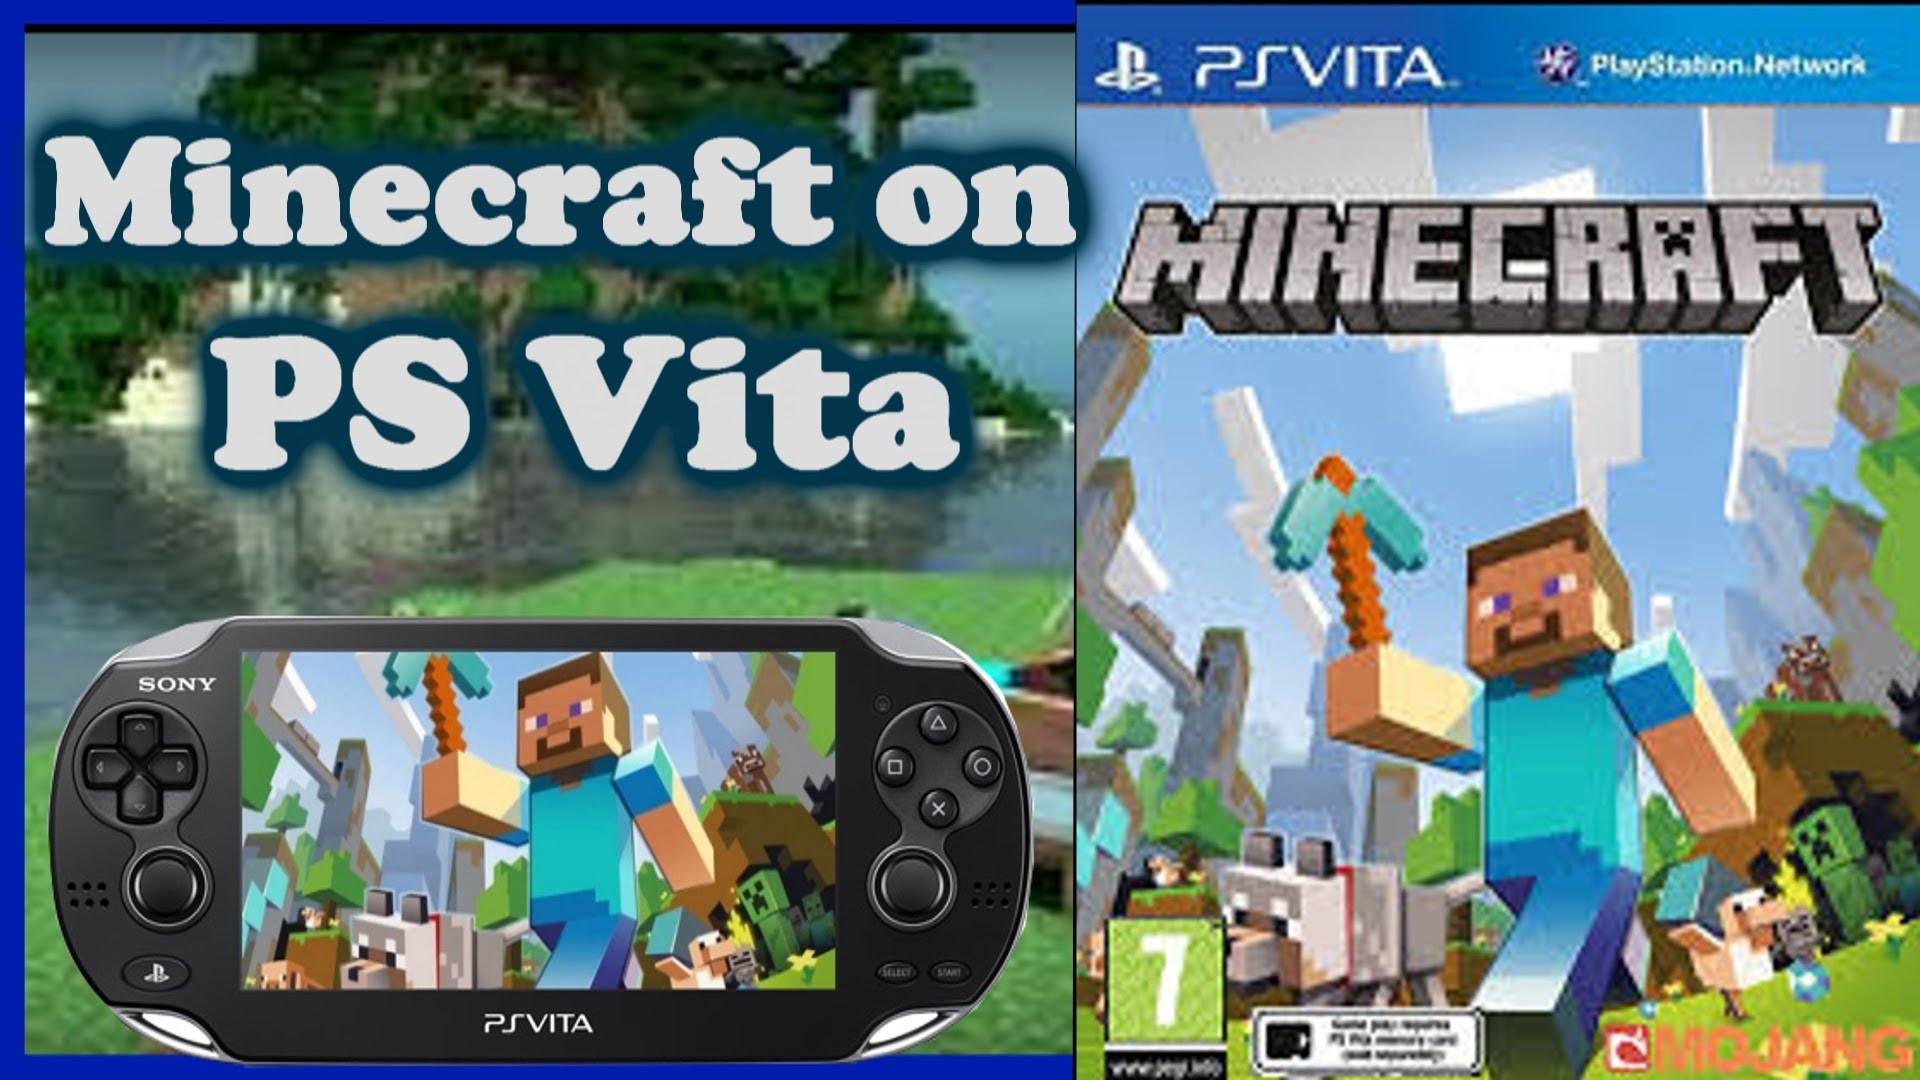 Minecraft Microsoft Ps Vita Edition Out On The Ps Store On Monday Thegeek Games